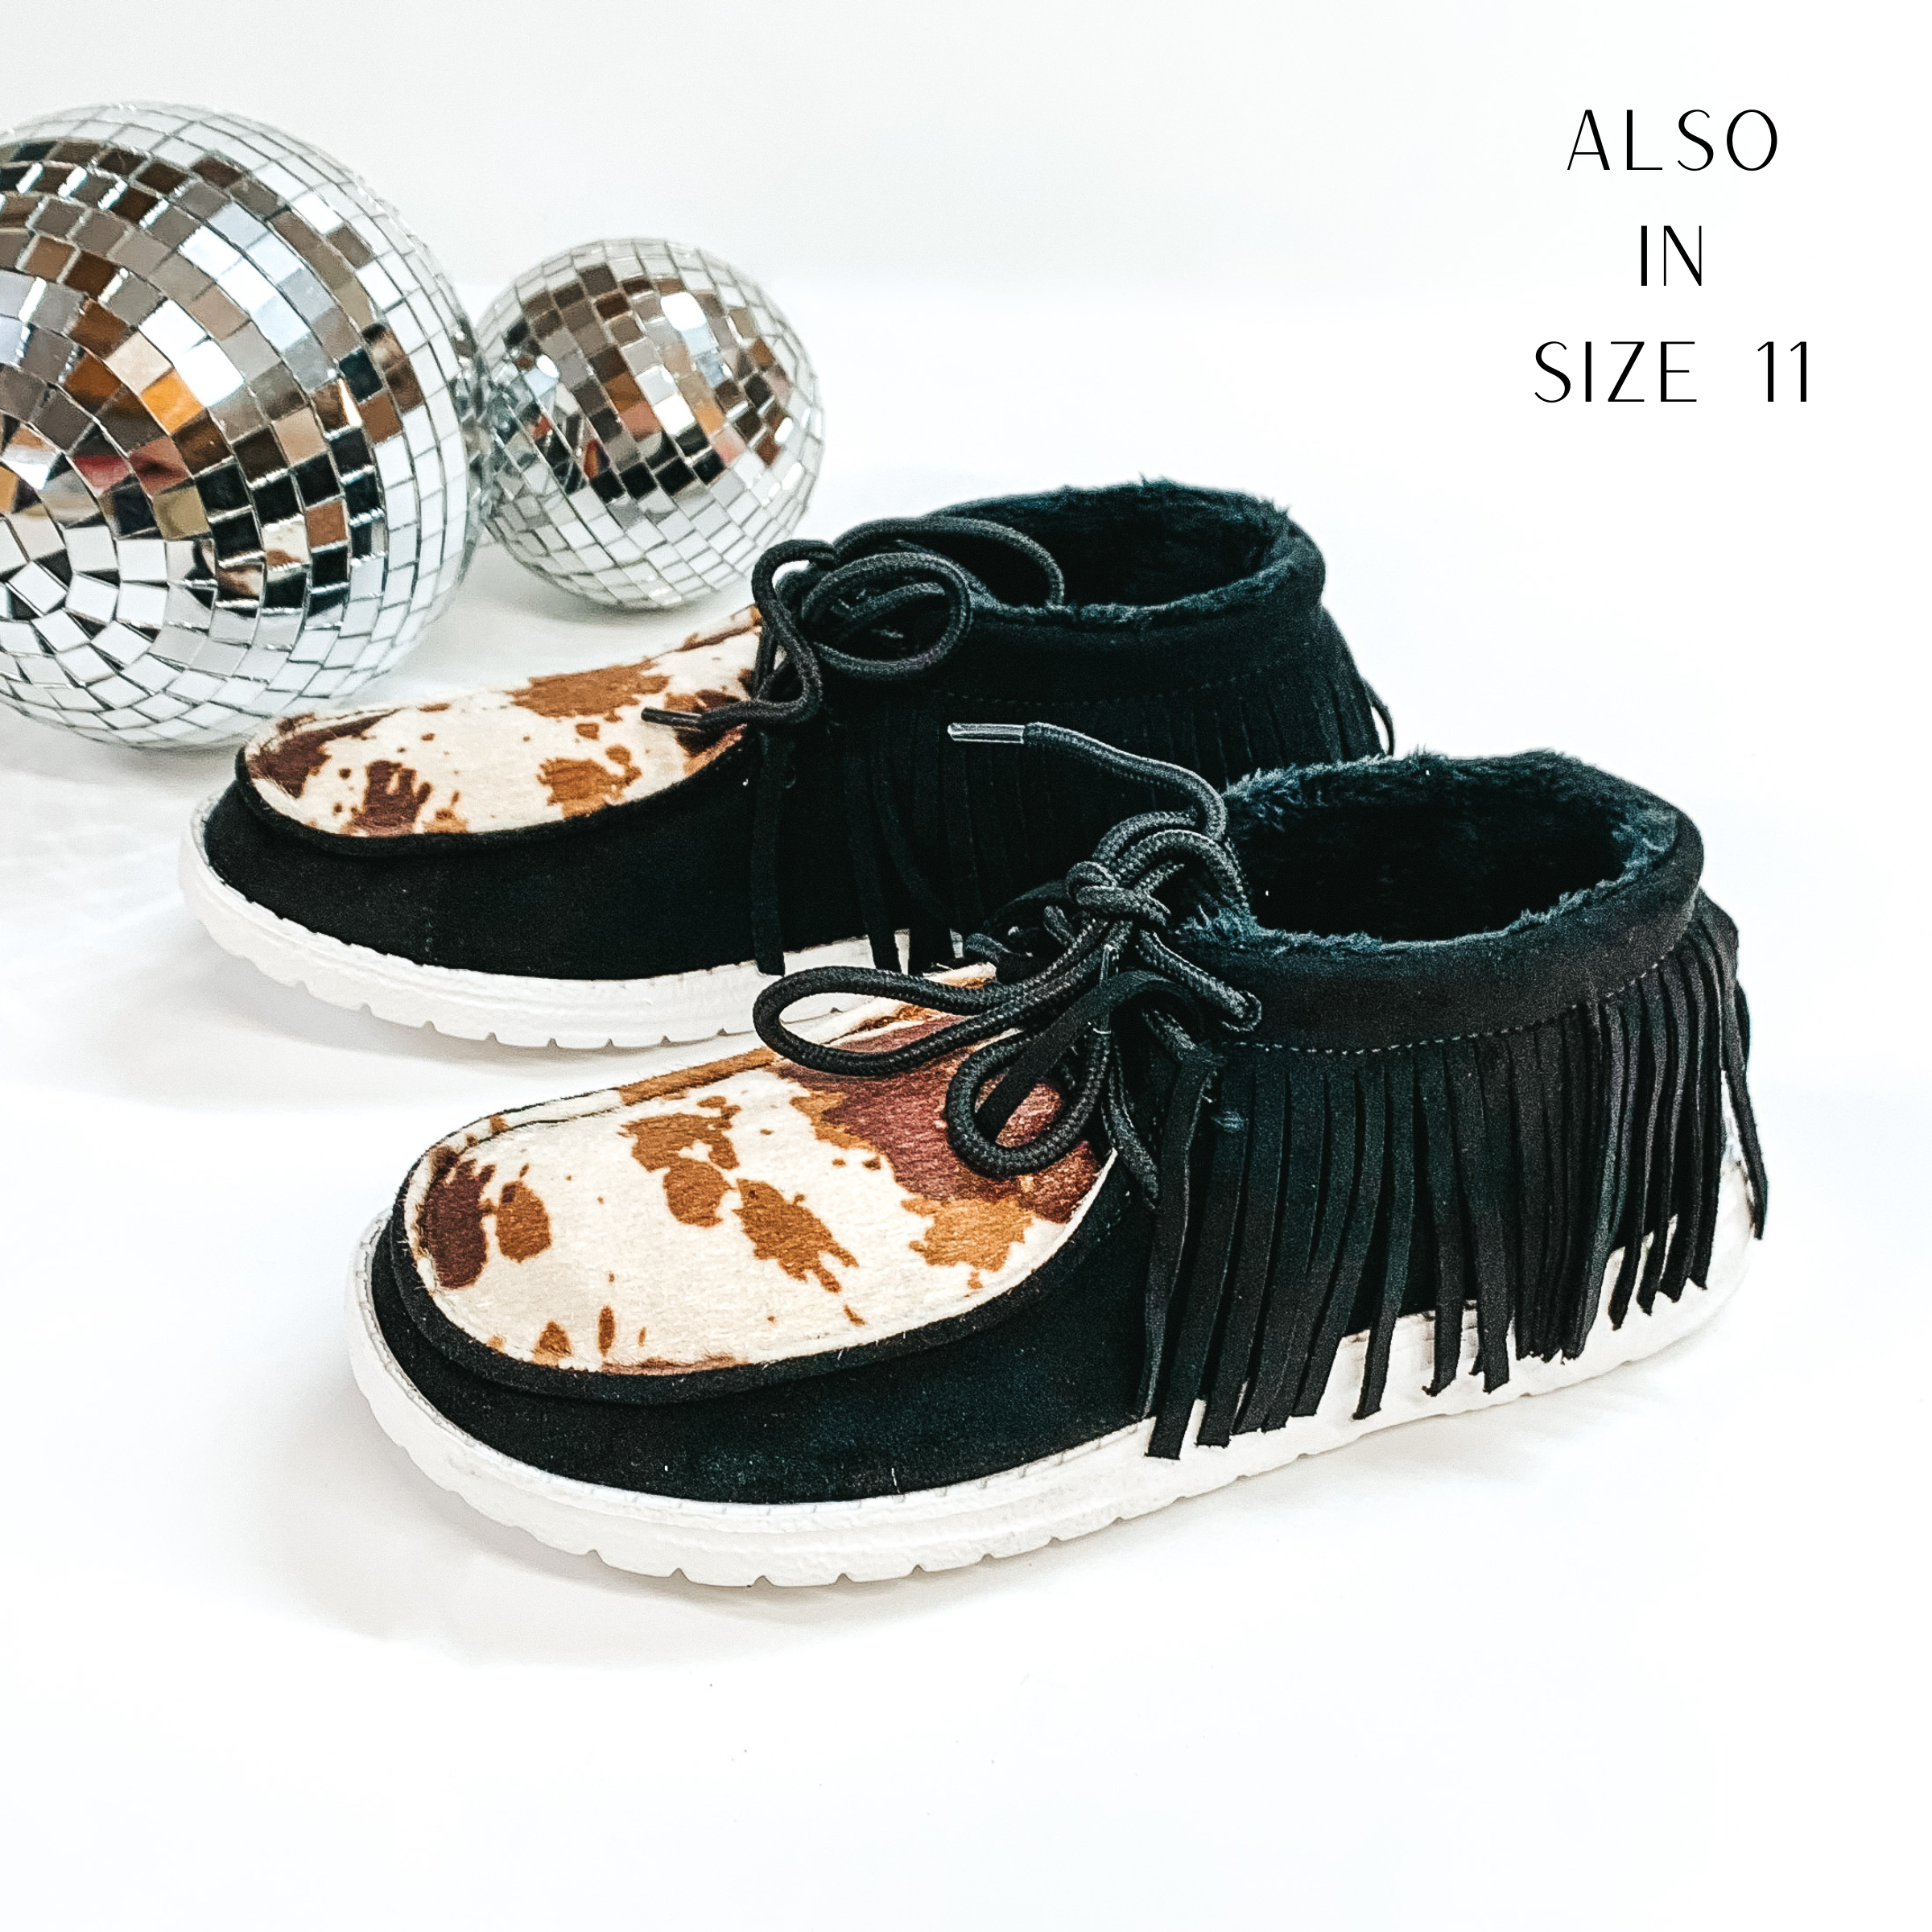 Very G | Have To Run Black Slip On High Top Loafers in Black with Cow Print and Black Fringe - Giddy Up Glamour Boutique